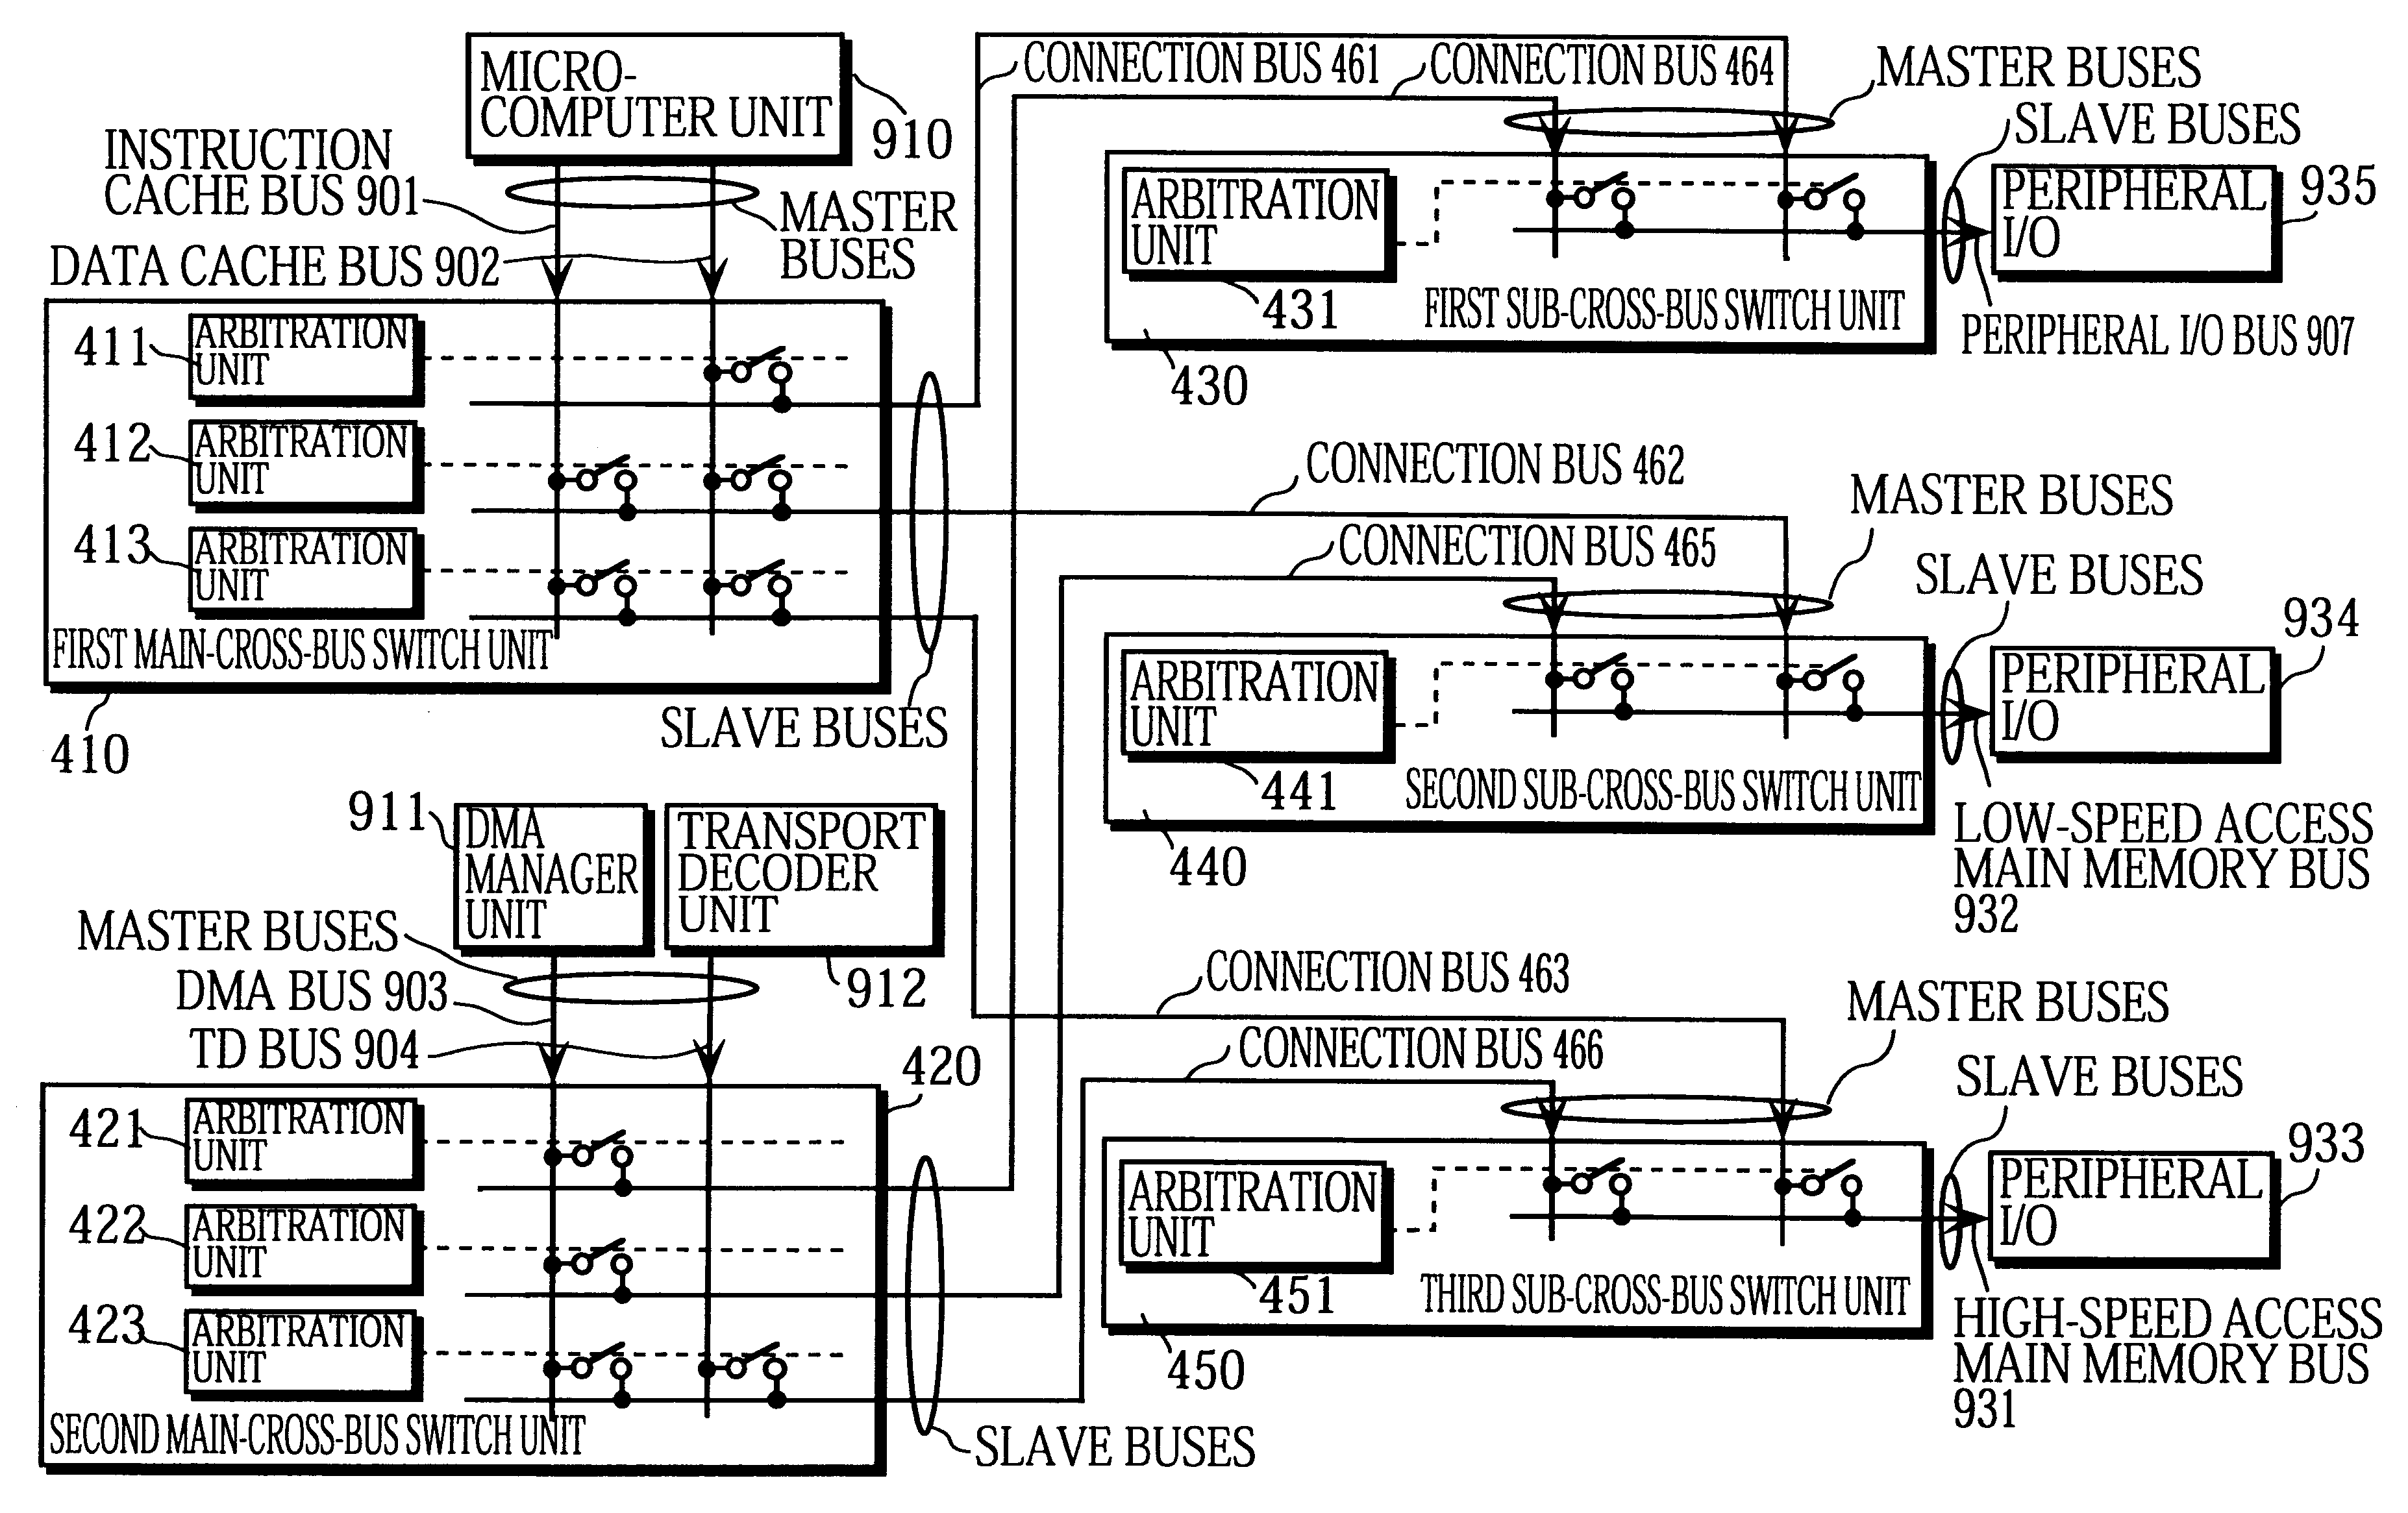 System LSI and a cross-bus switch apparatus achieved in a plurality of circuits in which two or more pairs of a source apparatus and a destination apparatus are connected simultaneously and buses are wired without concentration